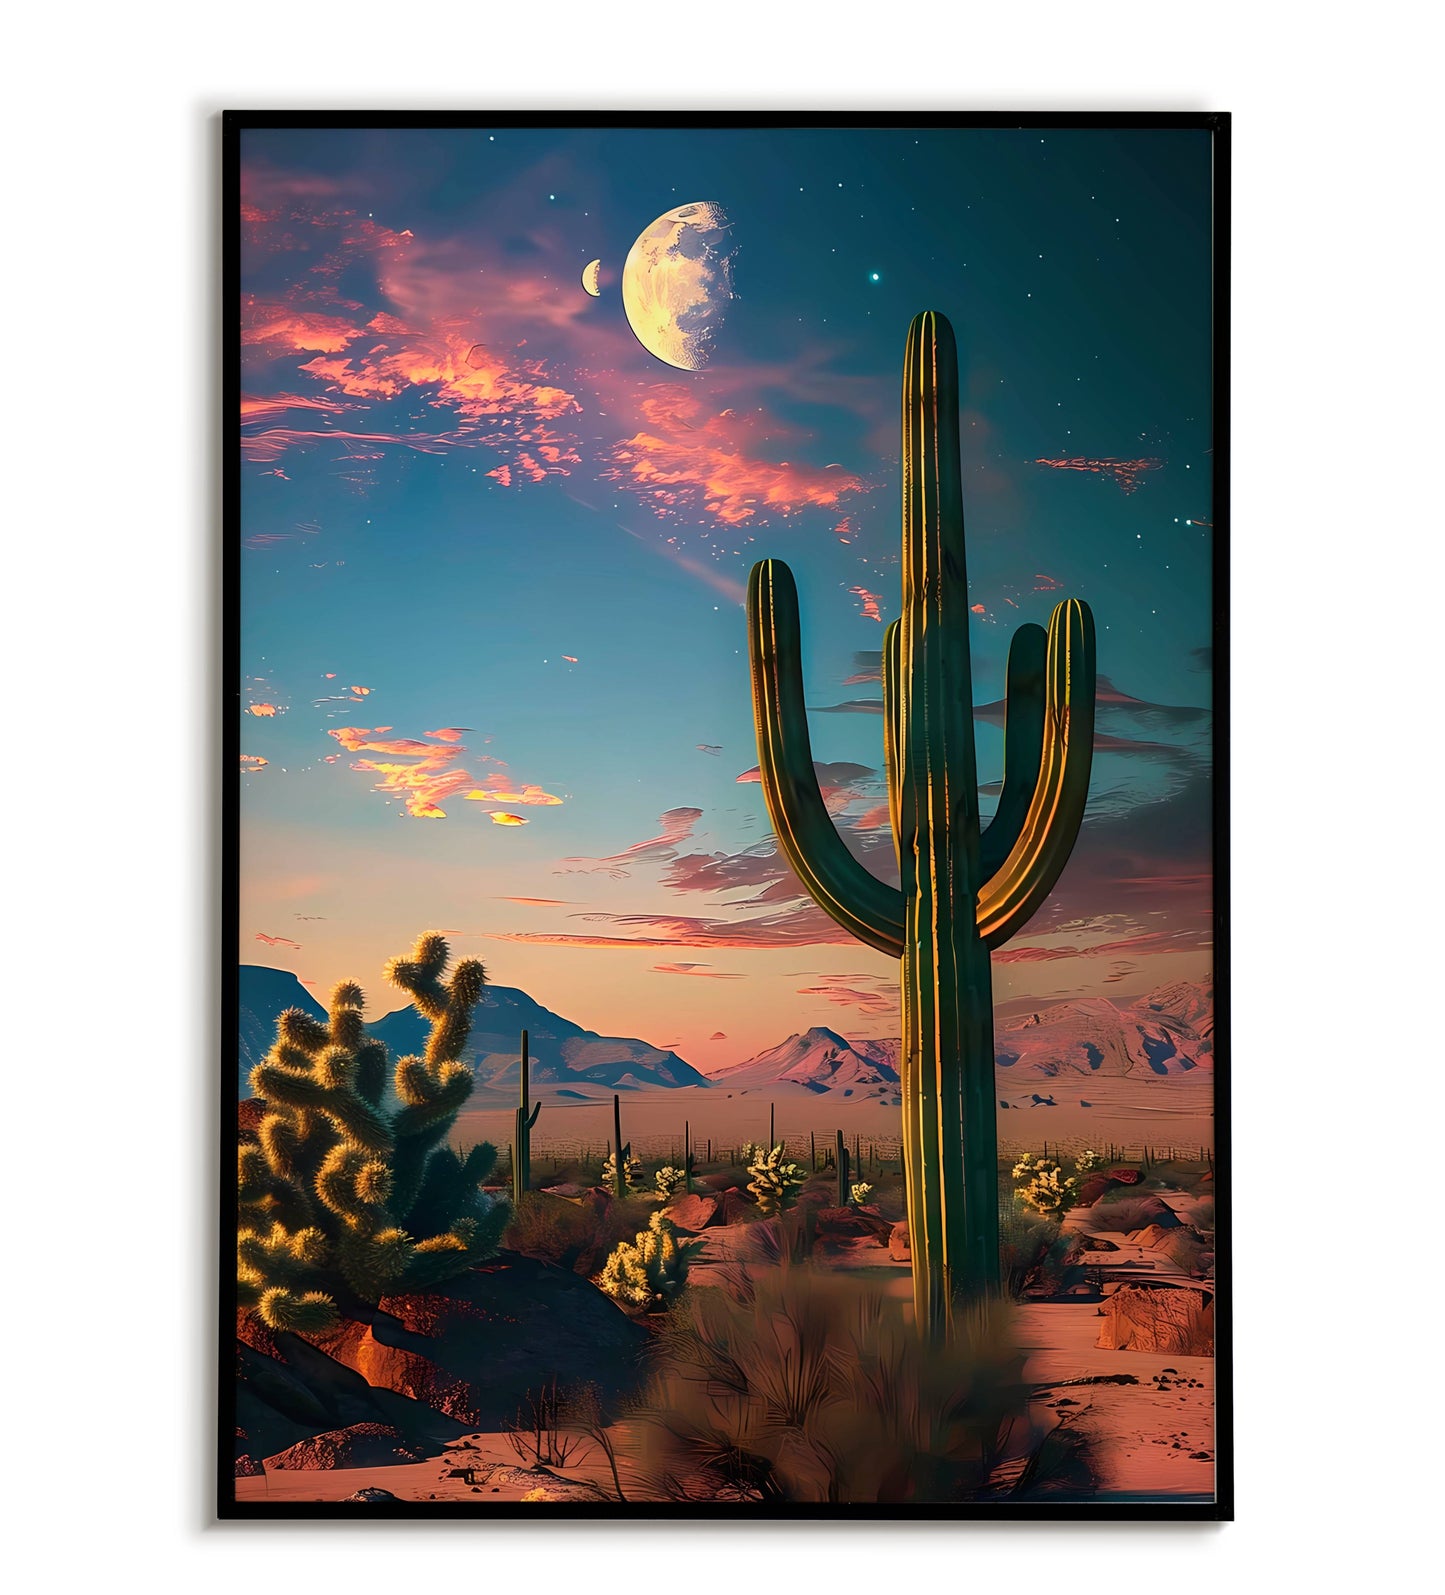 Moonlit Cactus printable poster. Available for purchase as a physical poster or digital download.